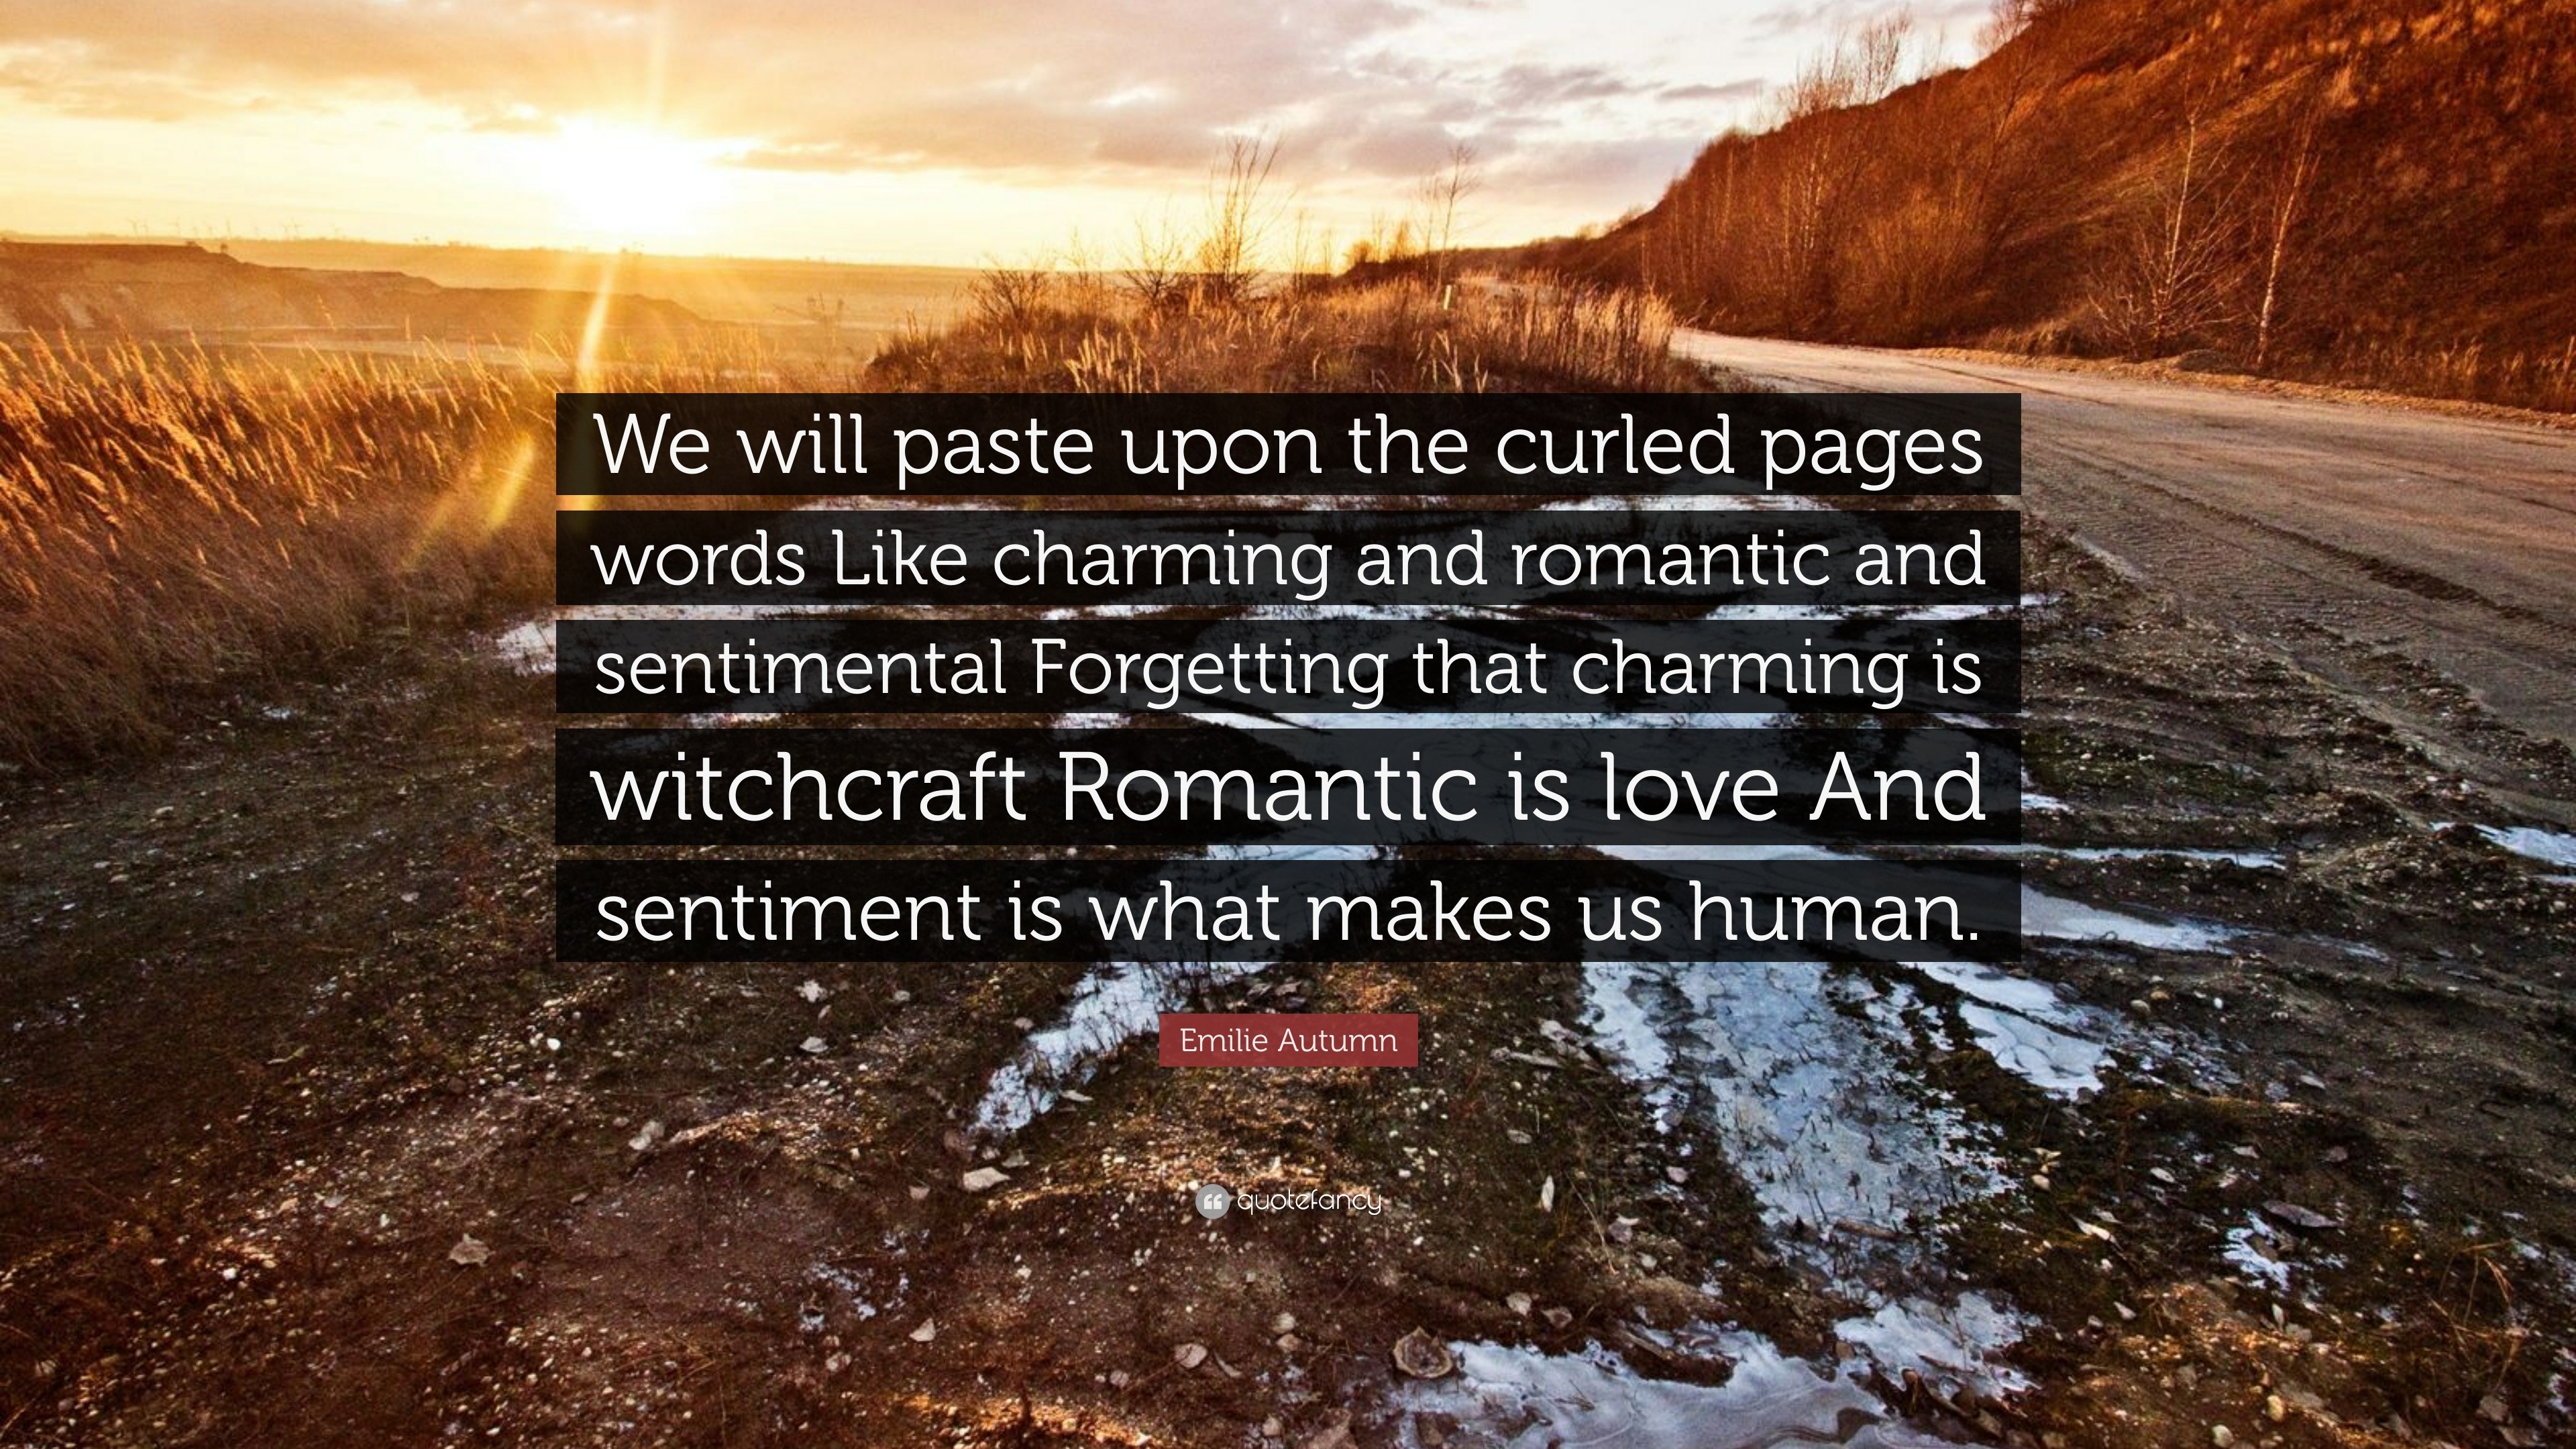 Emilie Autumn Quote “We will paste upon the curled pages words Like charming and